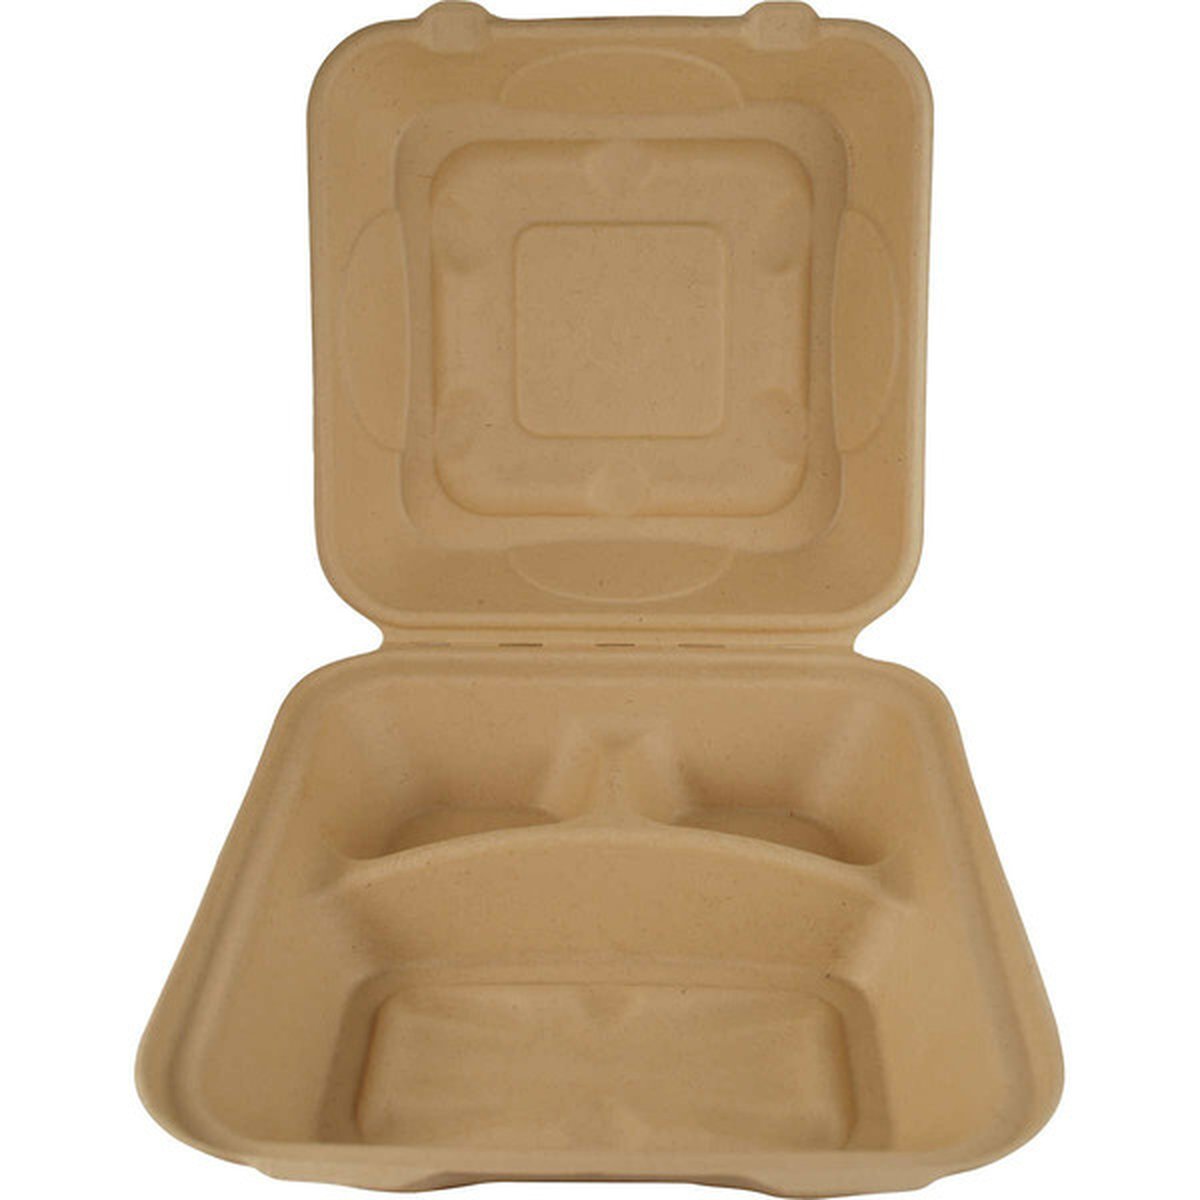 Food Tray 9" x 9" 3 Compartment 100ct nq